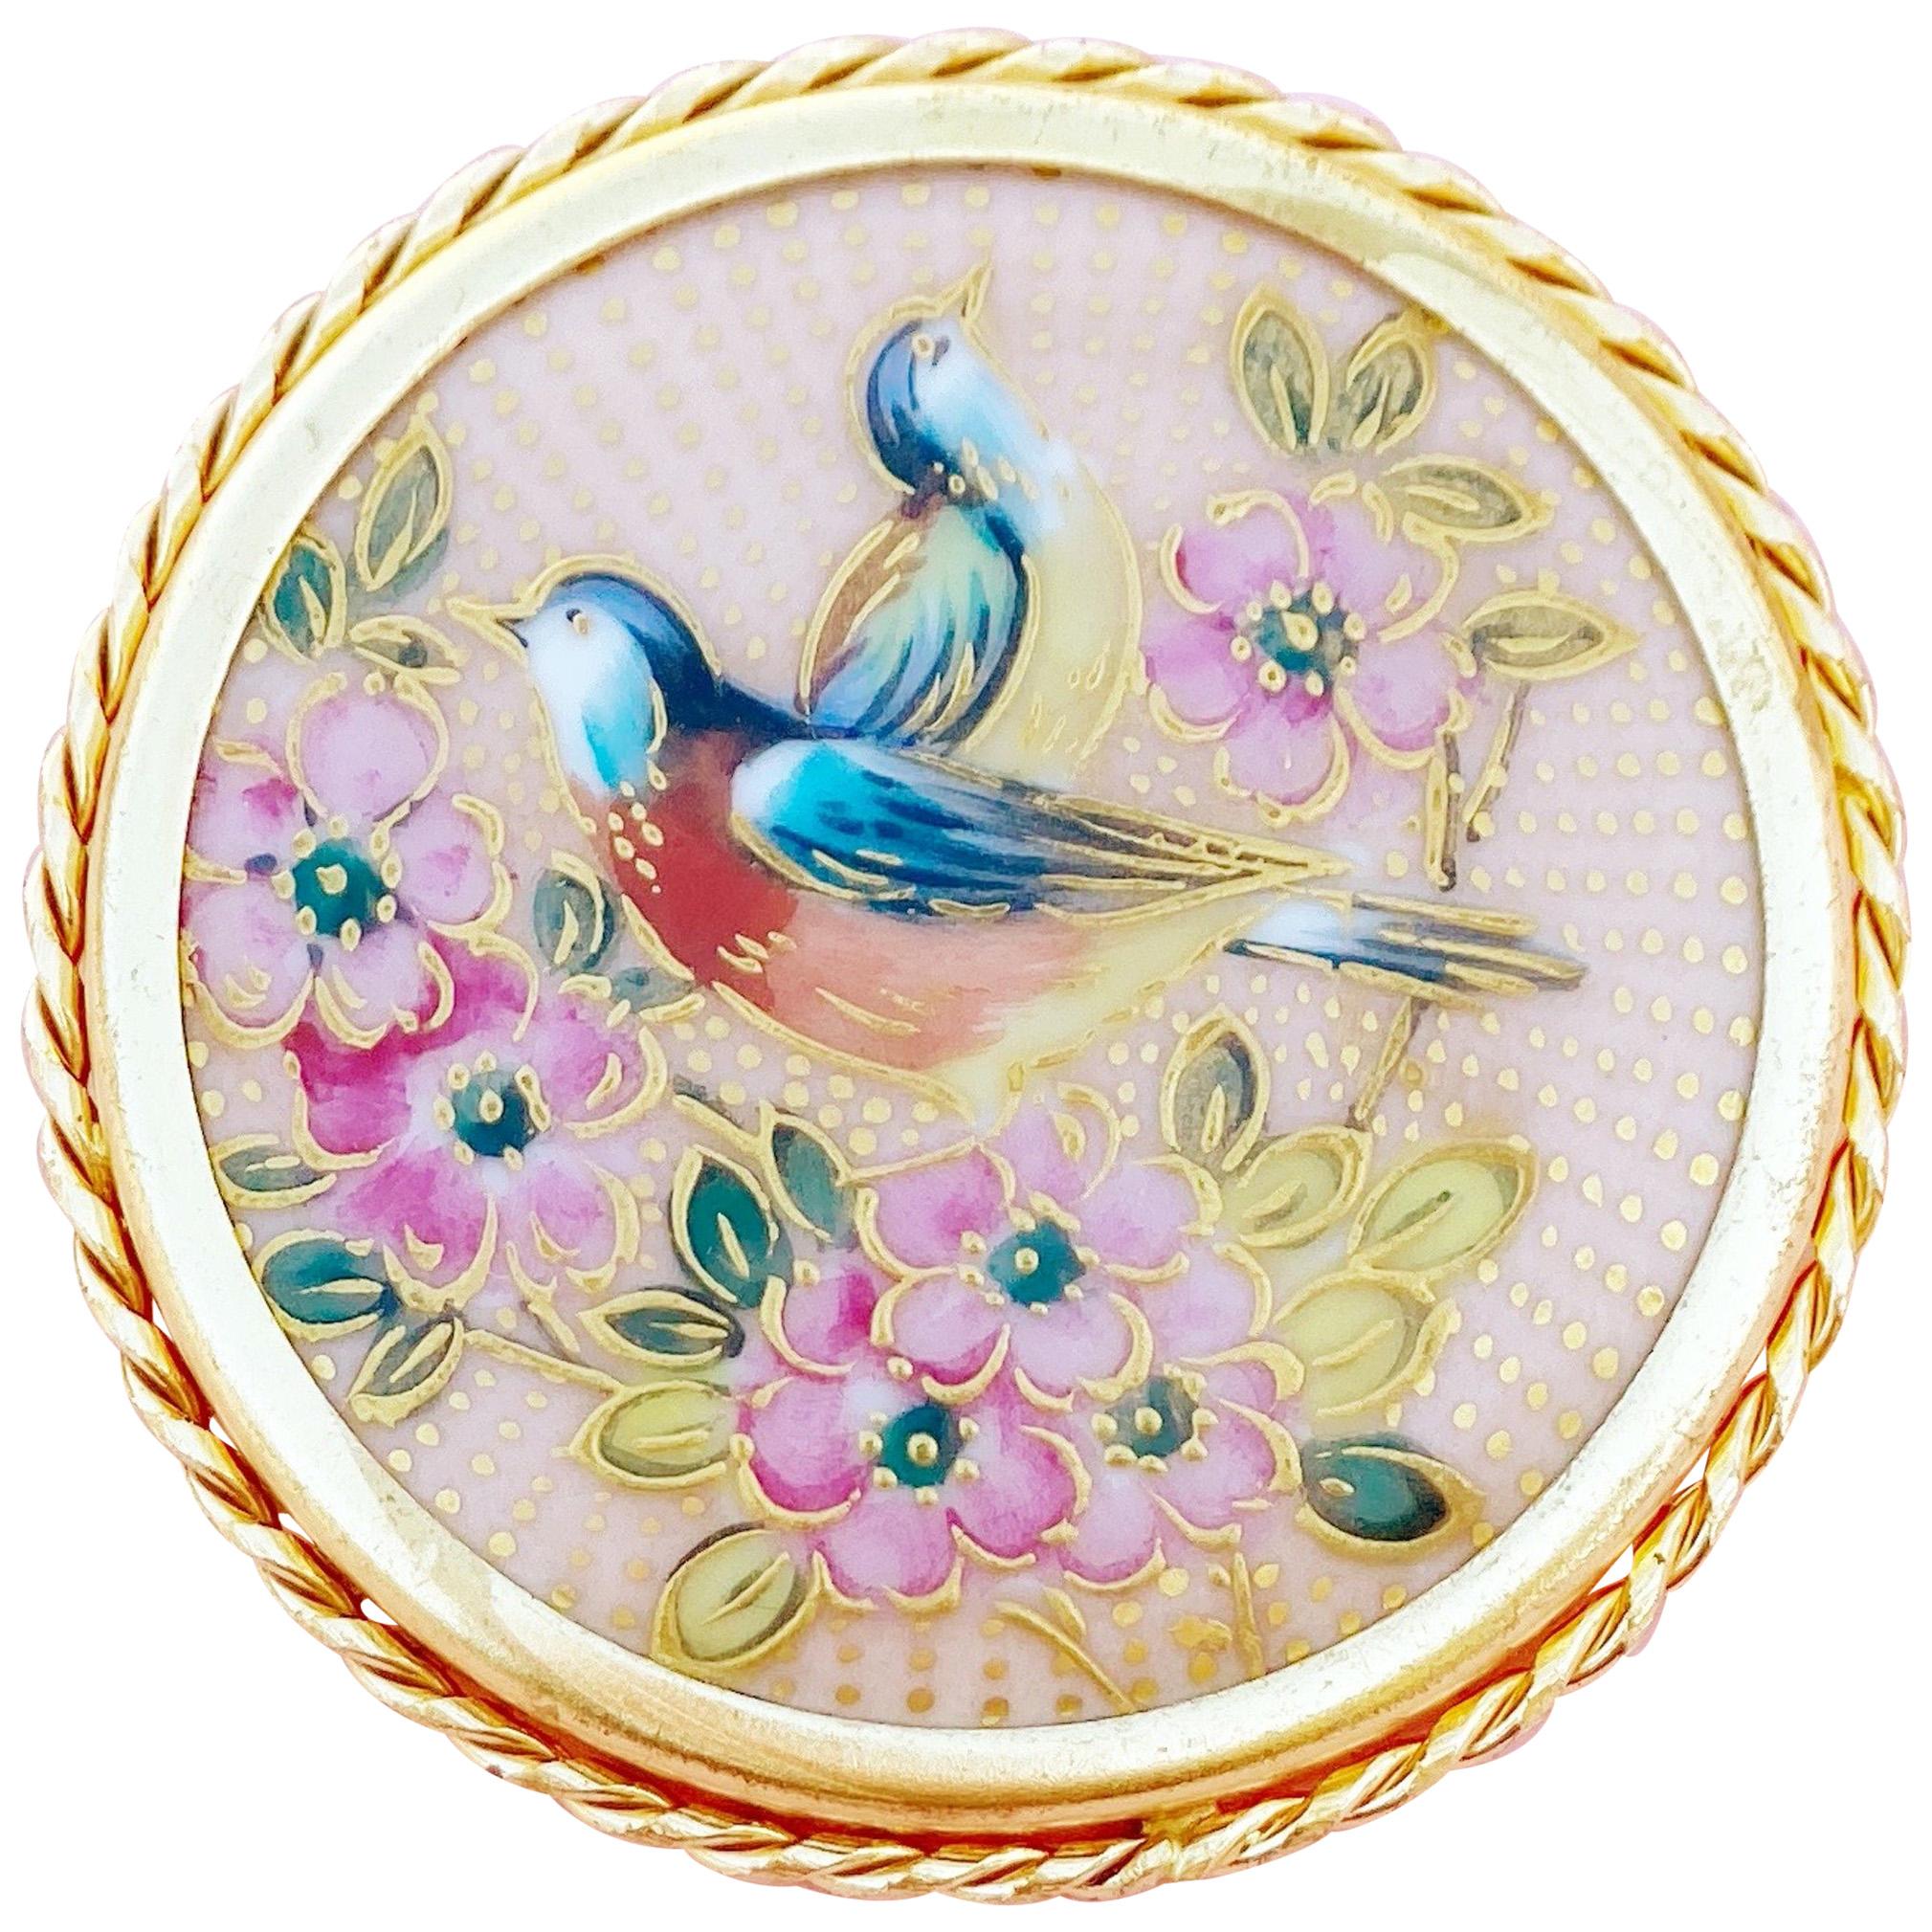 Antique Hand-Painted Limoges Porcelain Spring Birds Brooch by P. Pastaud, 1920s